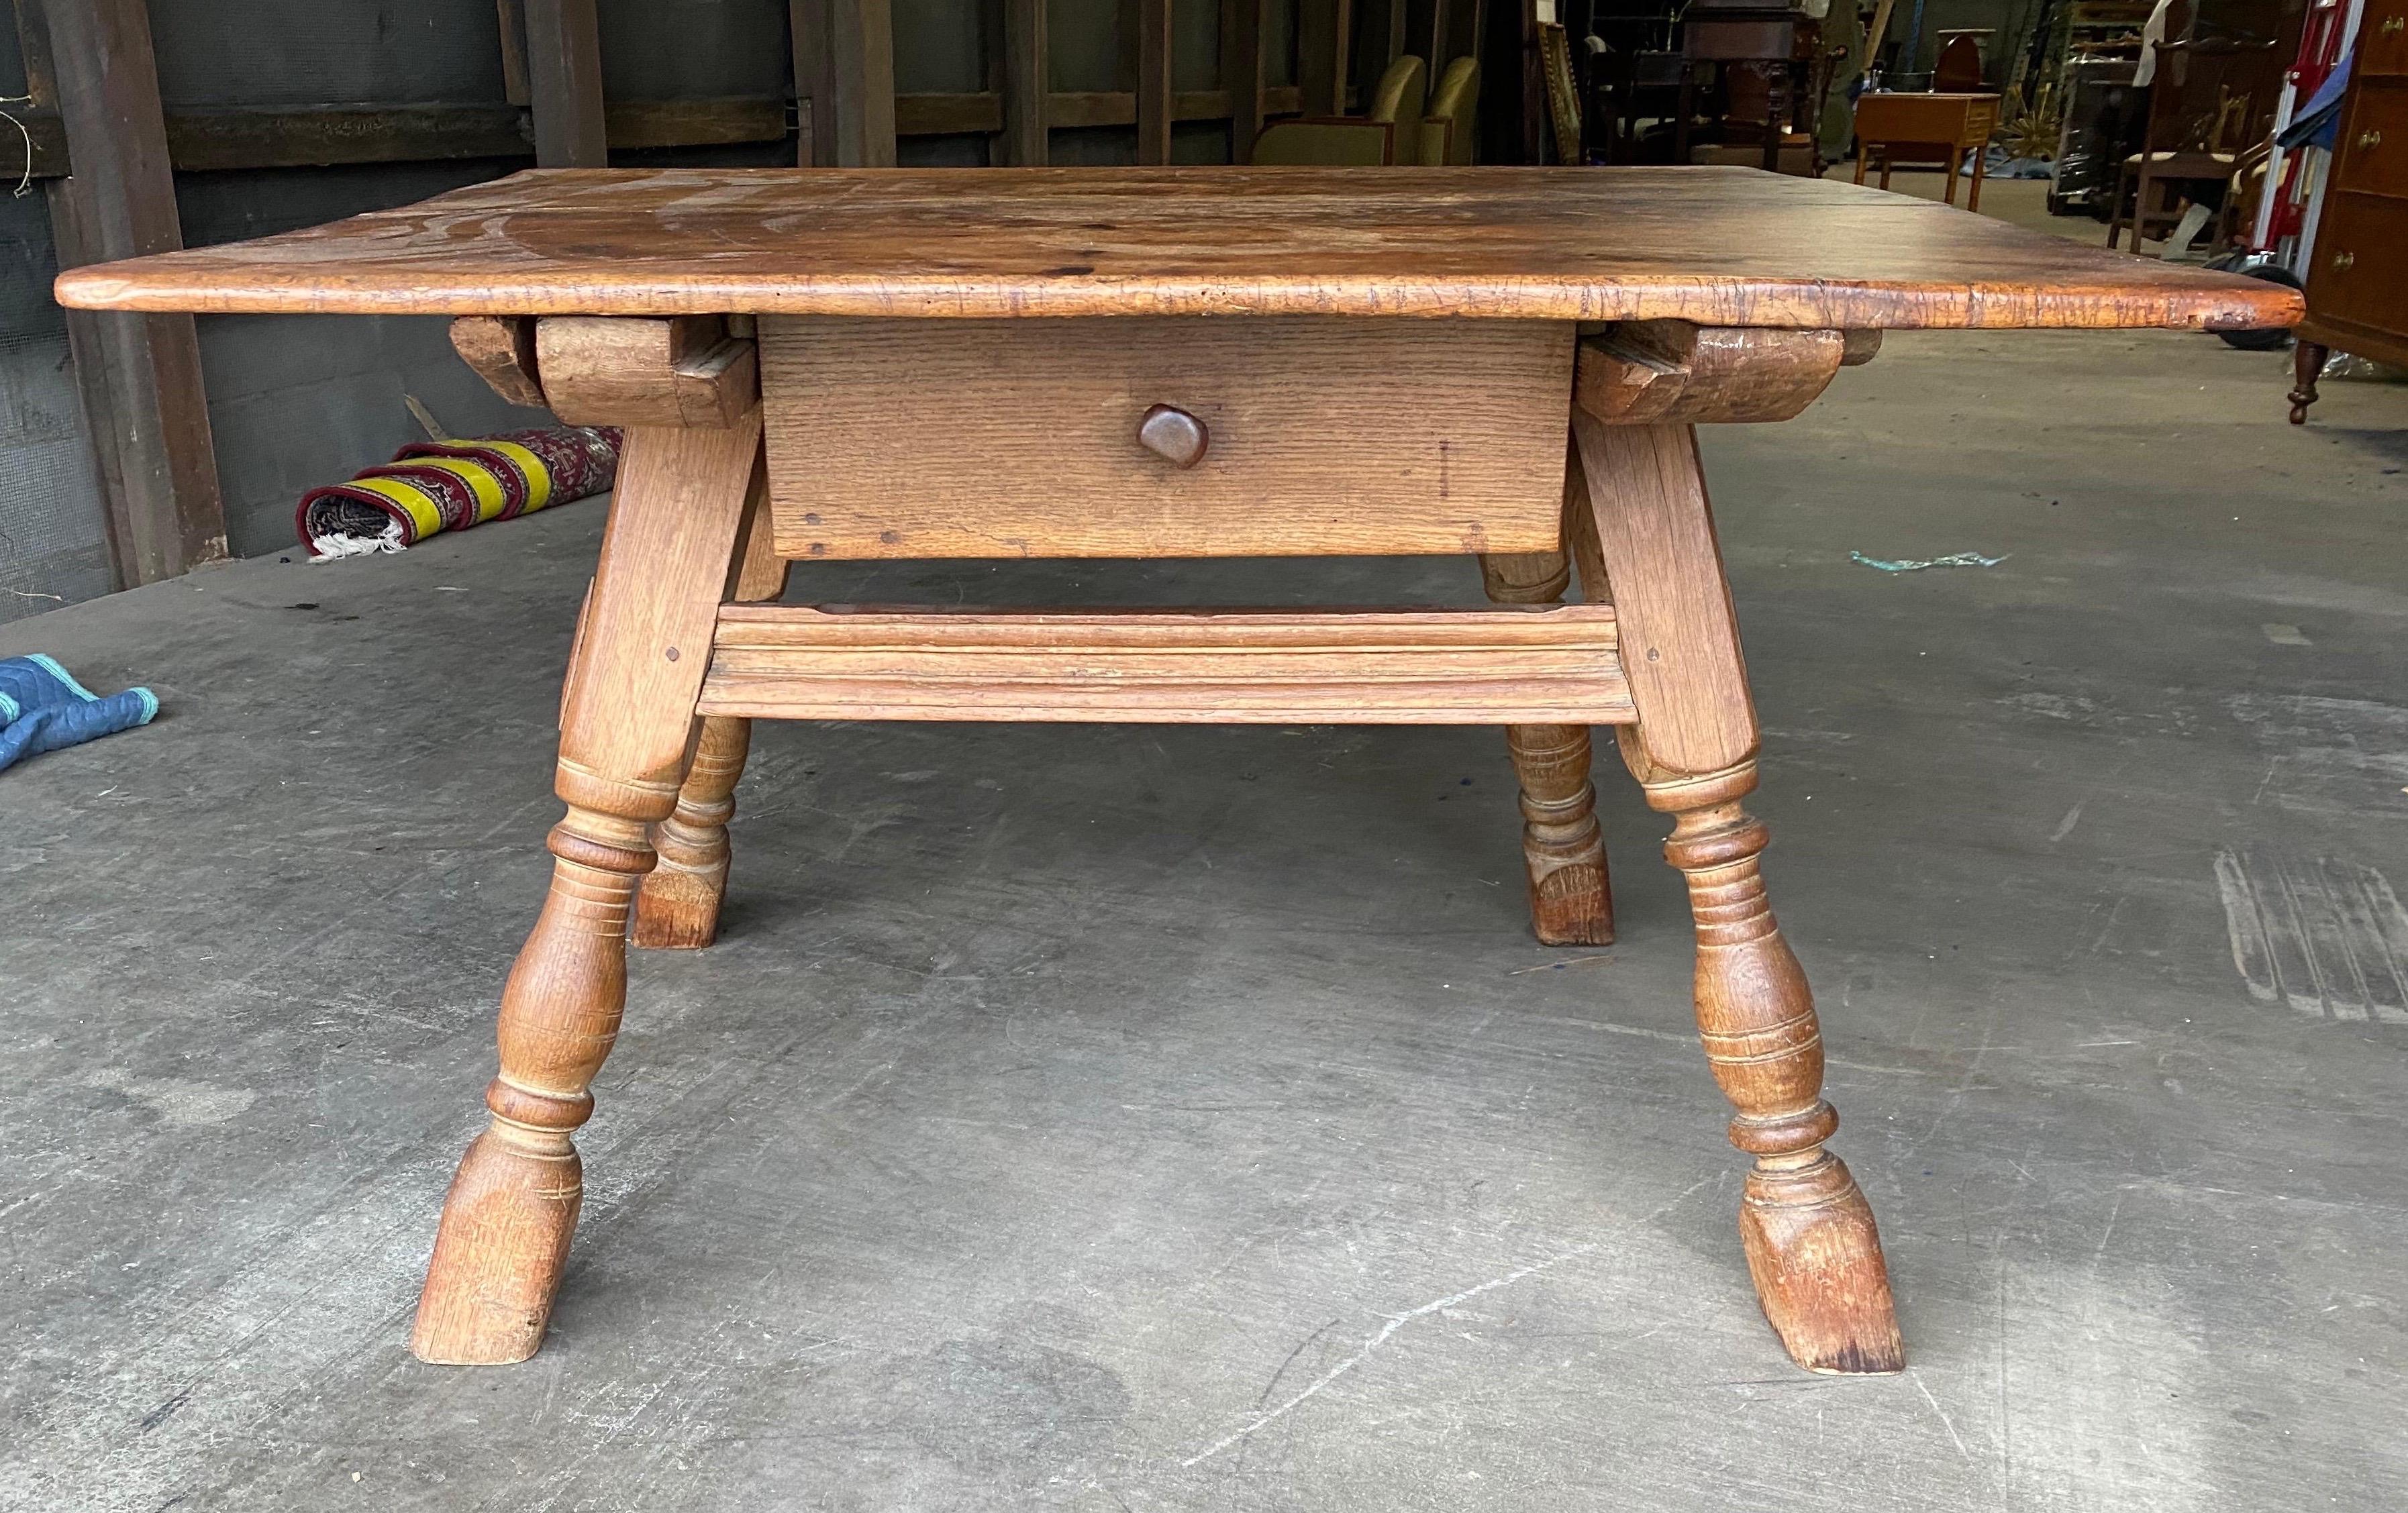 19th century Swedish oak table with drawer and scrolled apron.